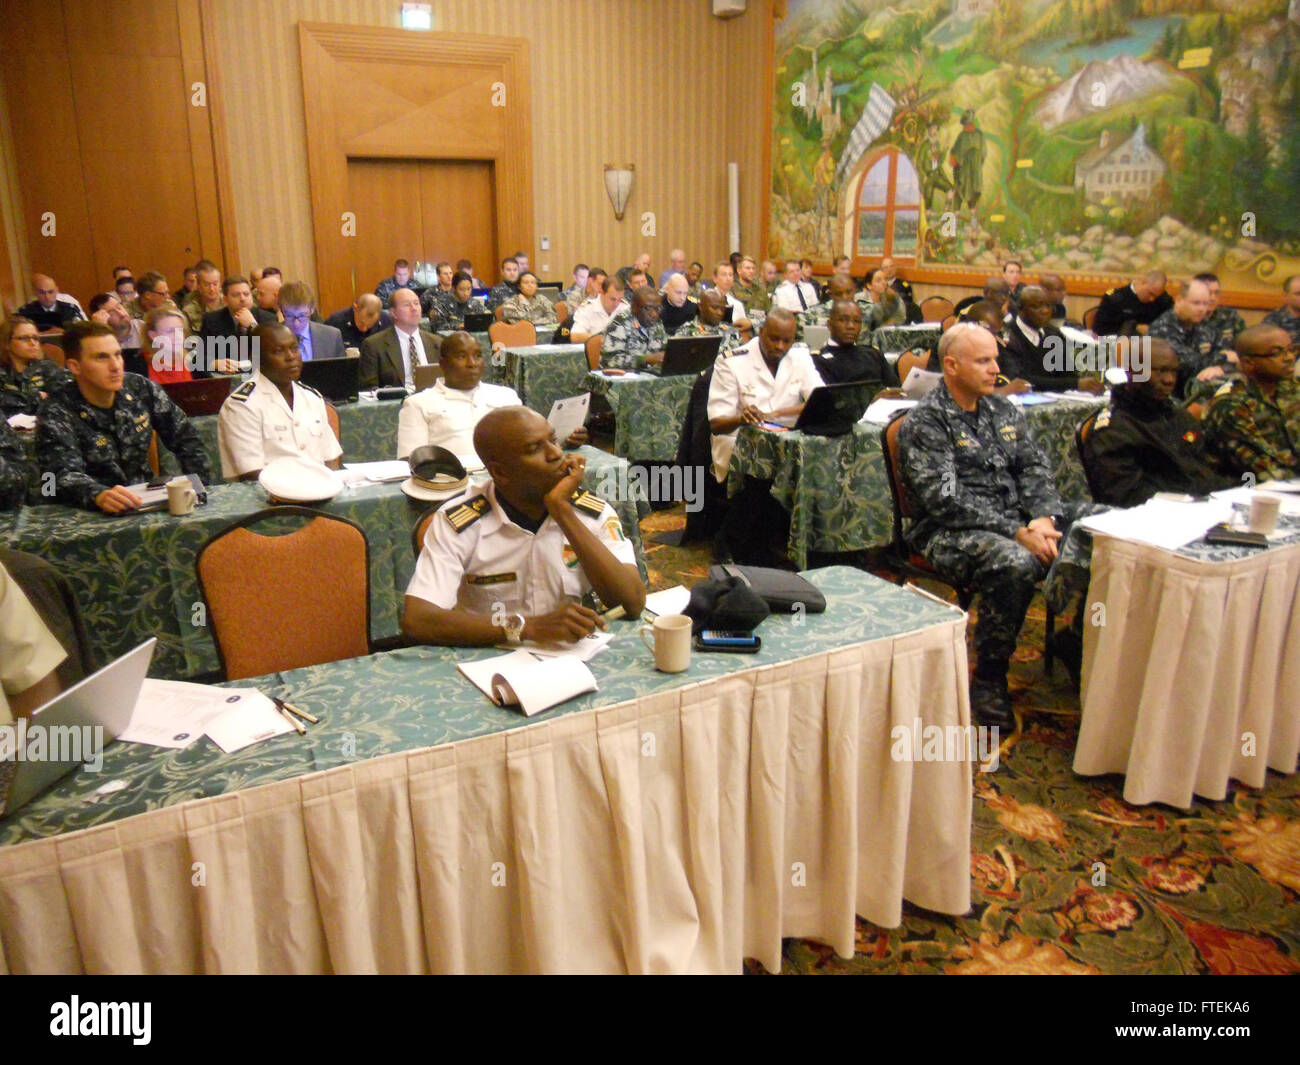 150112-N-ZZ999-001  GARMISCH-PARTENKIRCHEN, Germany (Jan. 12, 2015) Planners from more than 20 African and European maritime nations attend a final planning conference in Garmisch-Partenkirchen, Germany, for Exercise Obangame Express Jan. 12, 2015. The exercise will take place in the Gulf of Guinea in March 2015, and will focus on developing regional maritime interoperability. (U.S. Navy photo by Lt. Cmdr. Kent Laborde/Released) Stock Photo